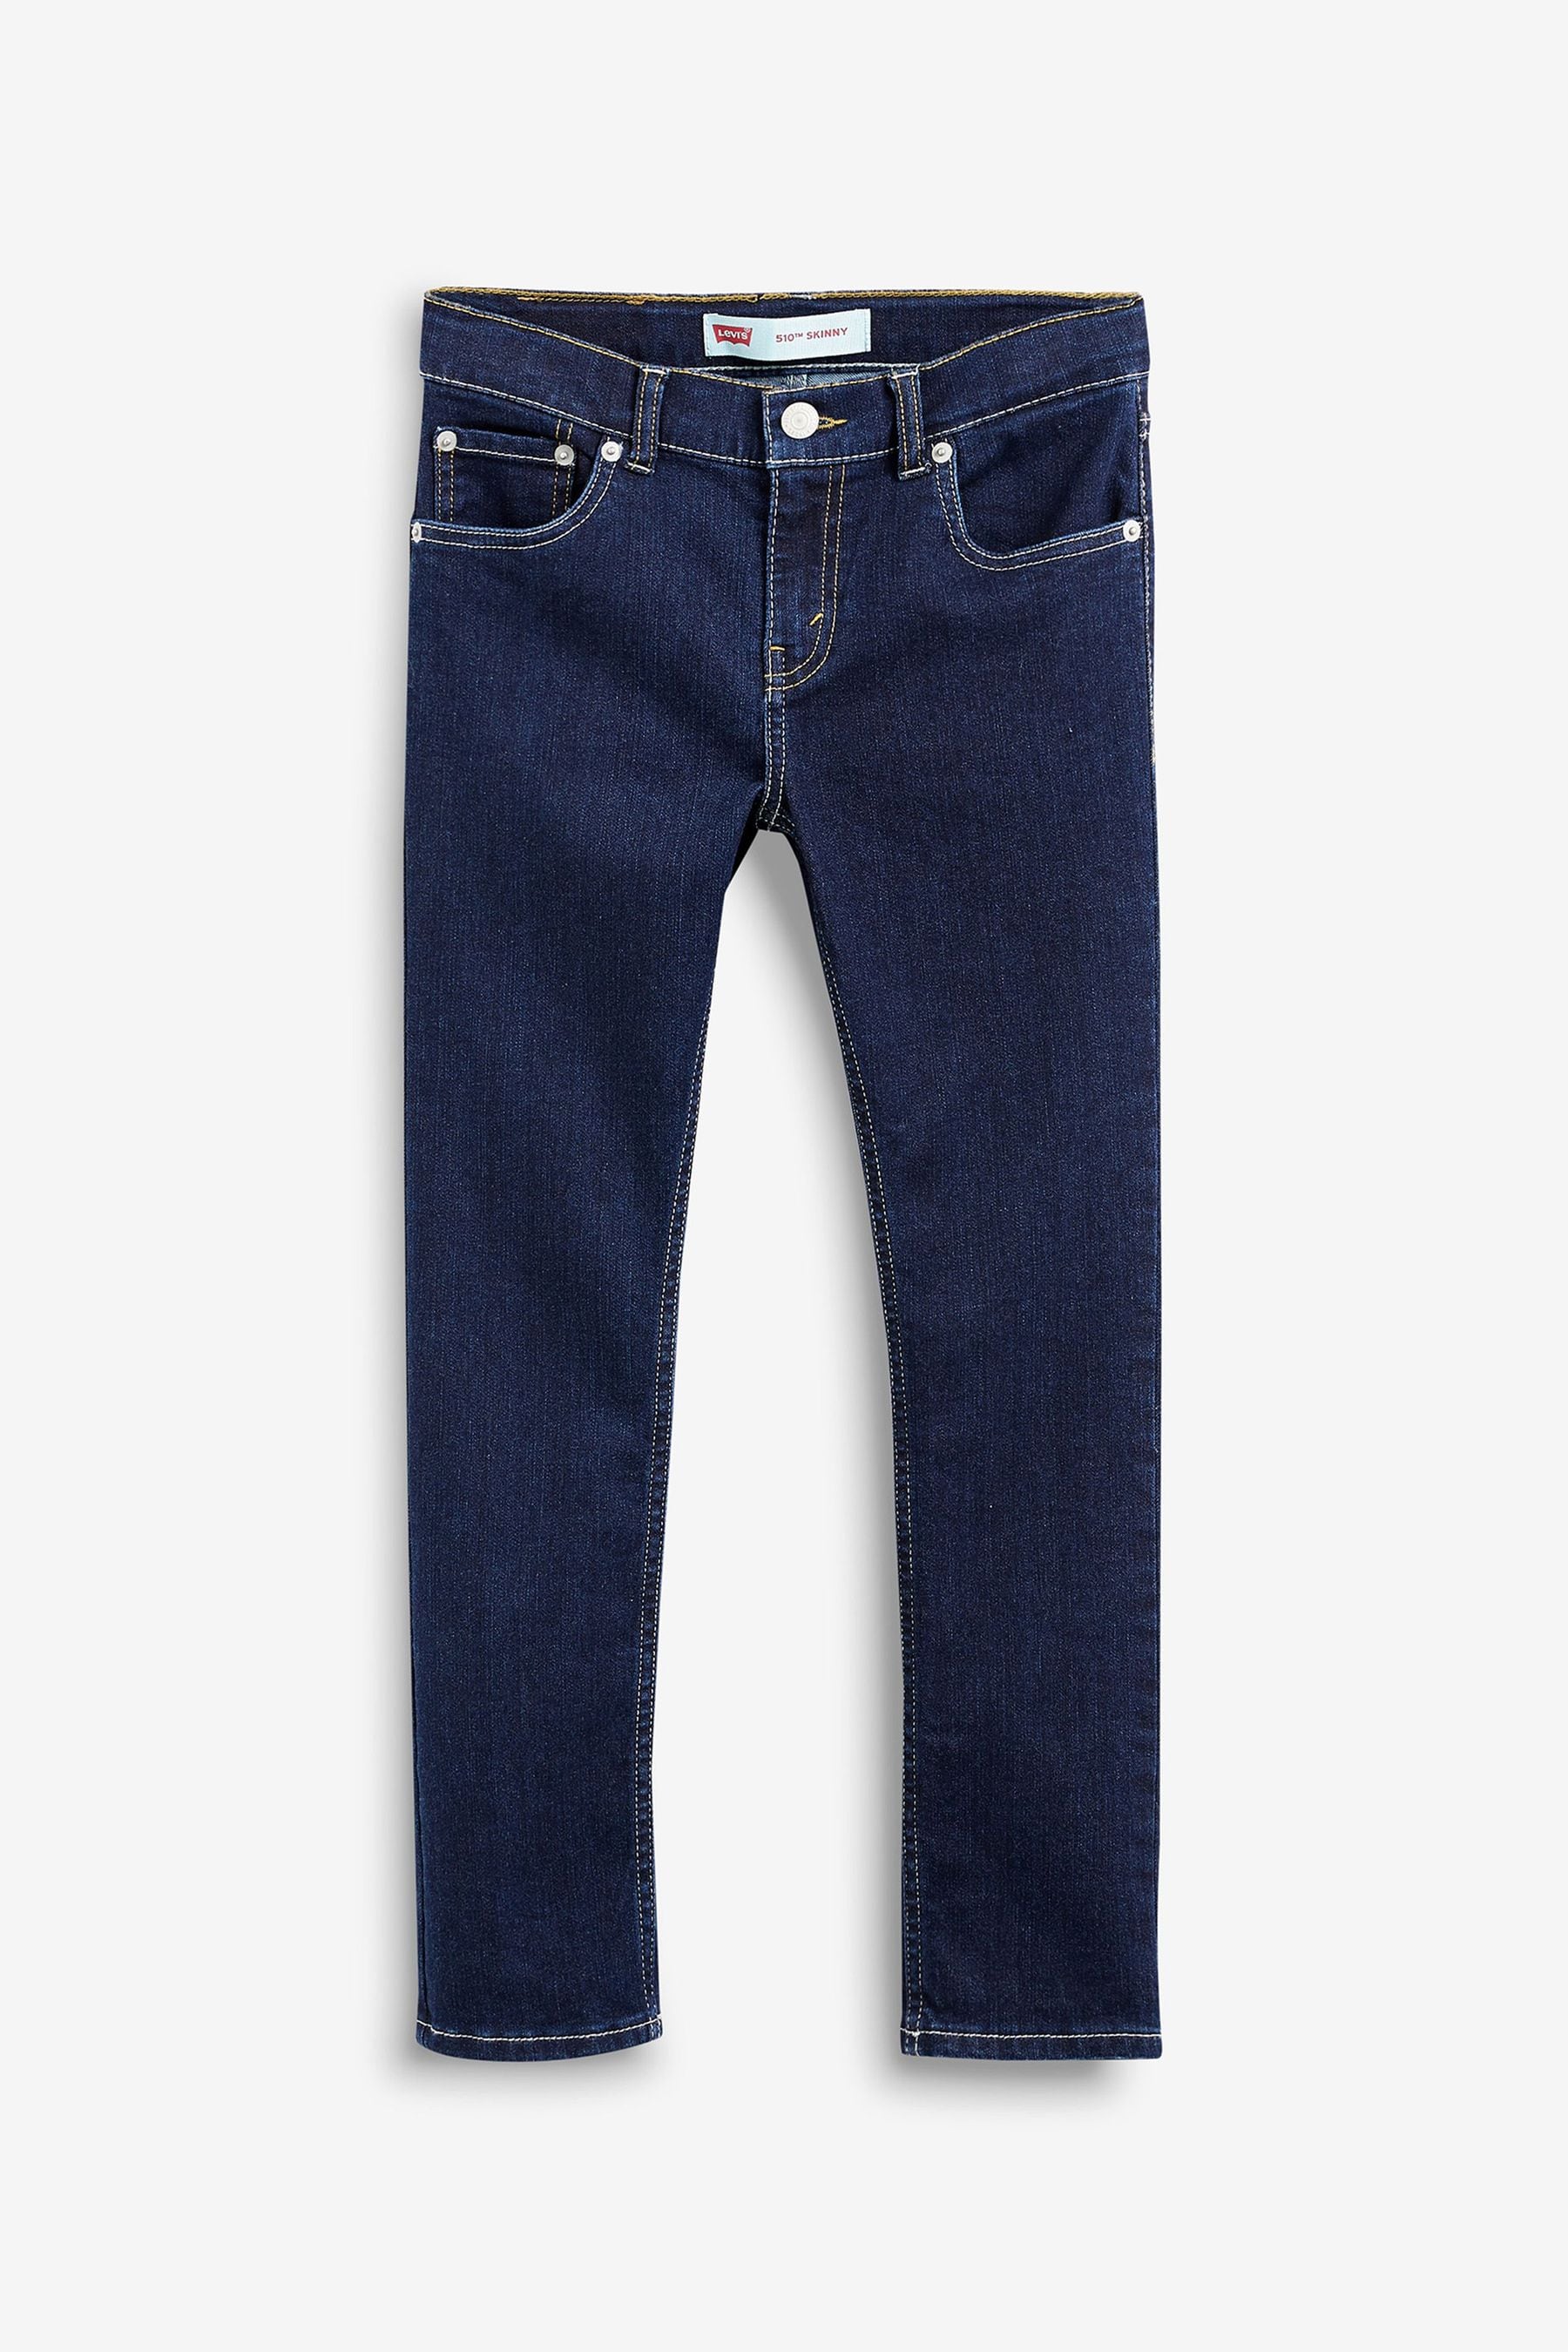 Buy Levi's® Twin Peaks Kids 510™ Skinny Fit Jeans from the Next UK ...